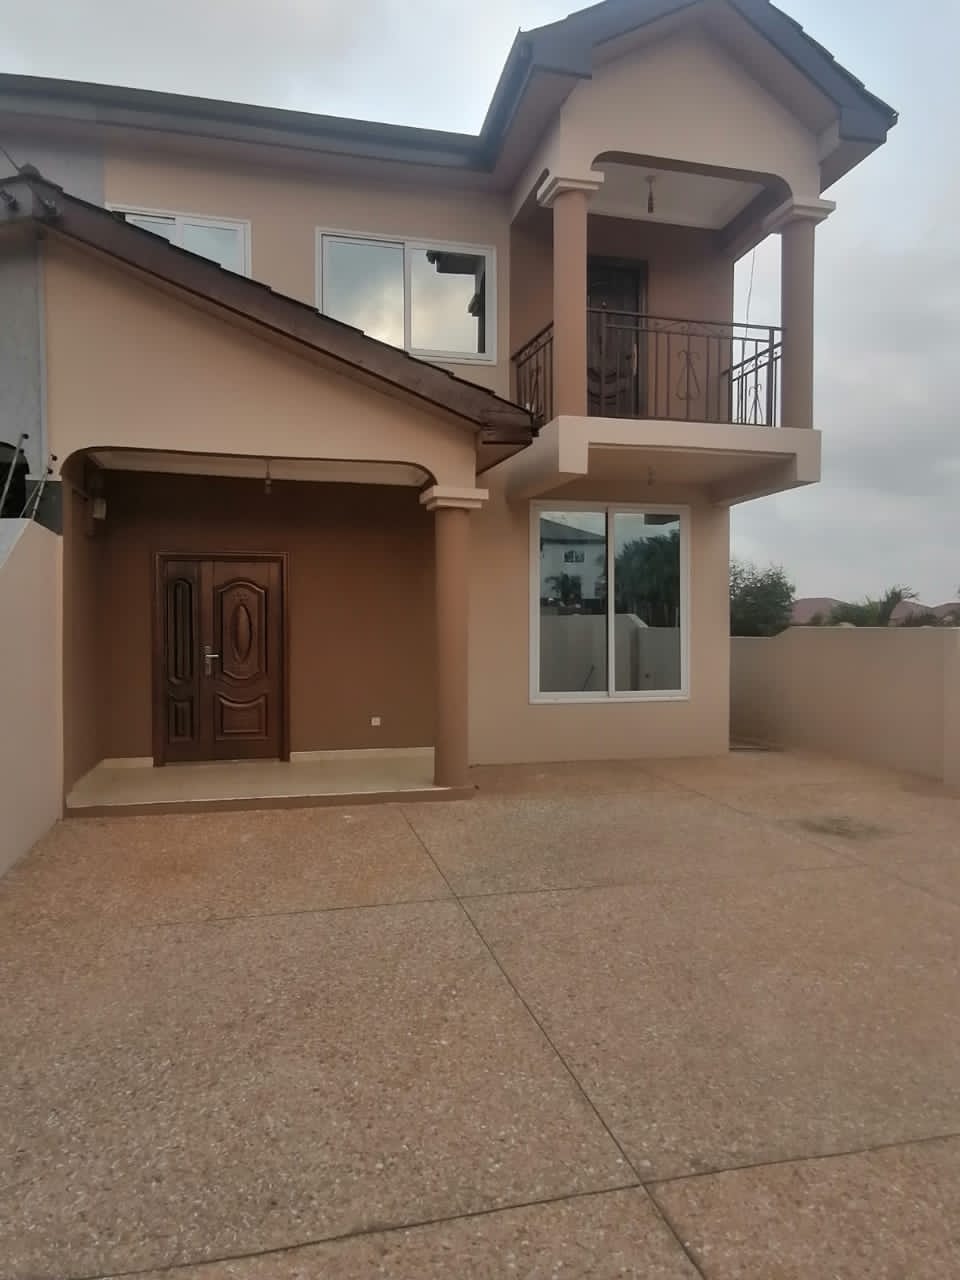 2 & 3 Bedrooms Semi-detached House For Rent